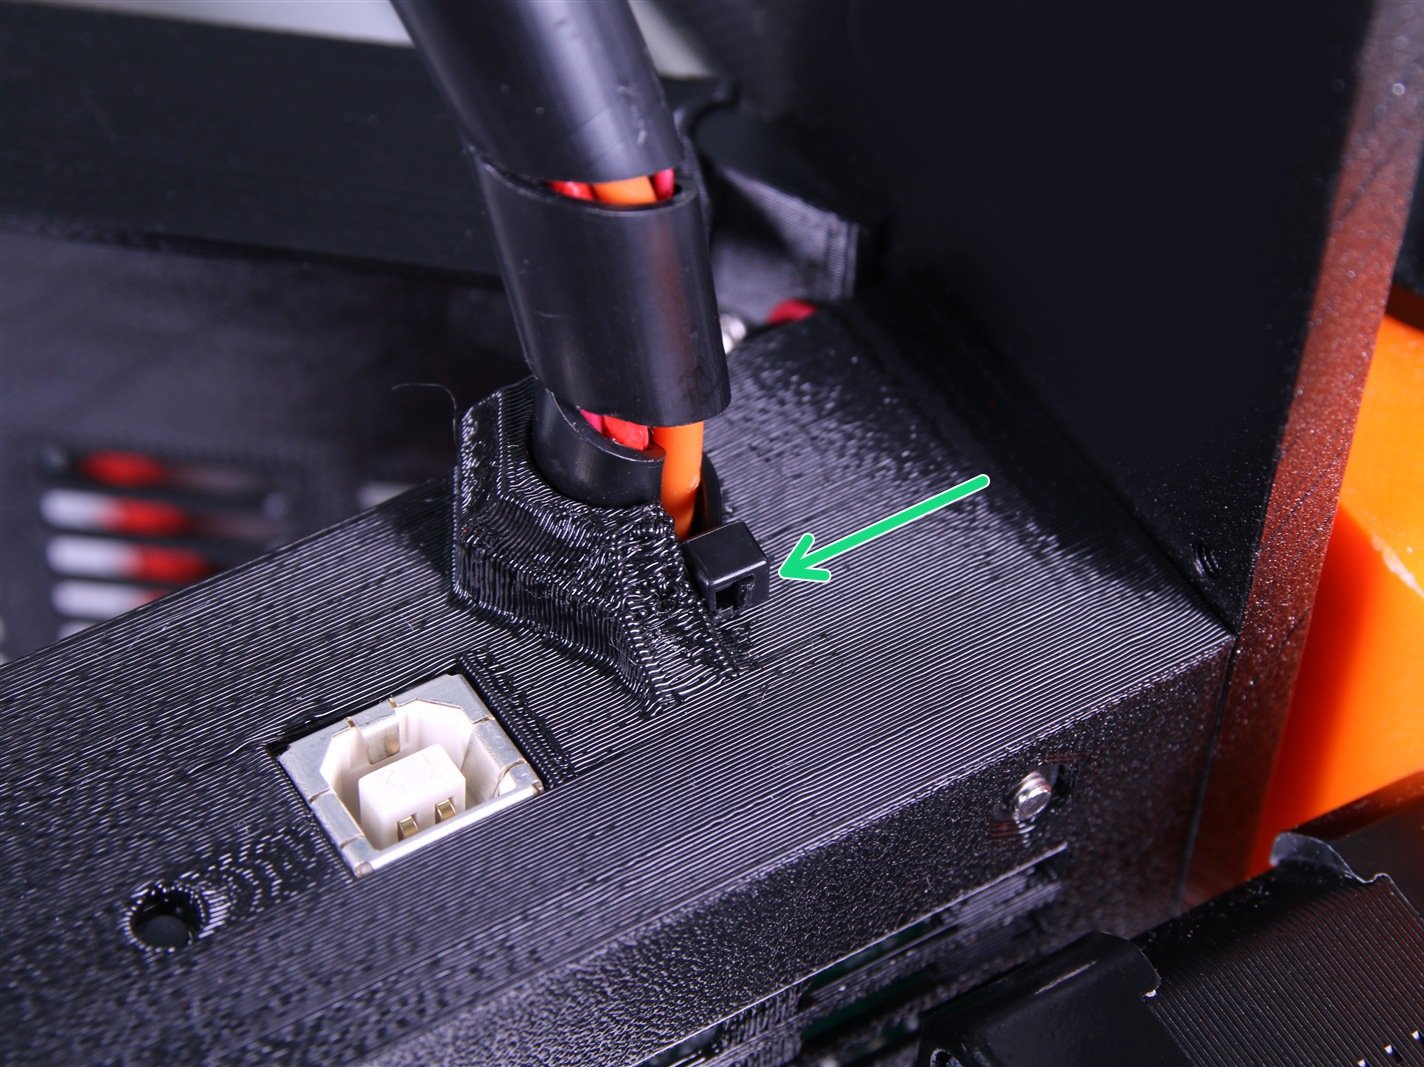 Securing extruder cables to the Rambo cover base